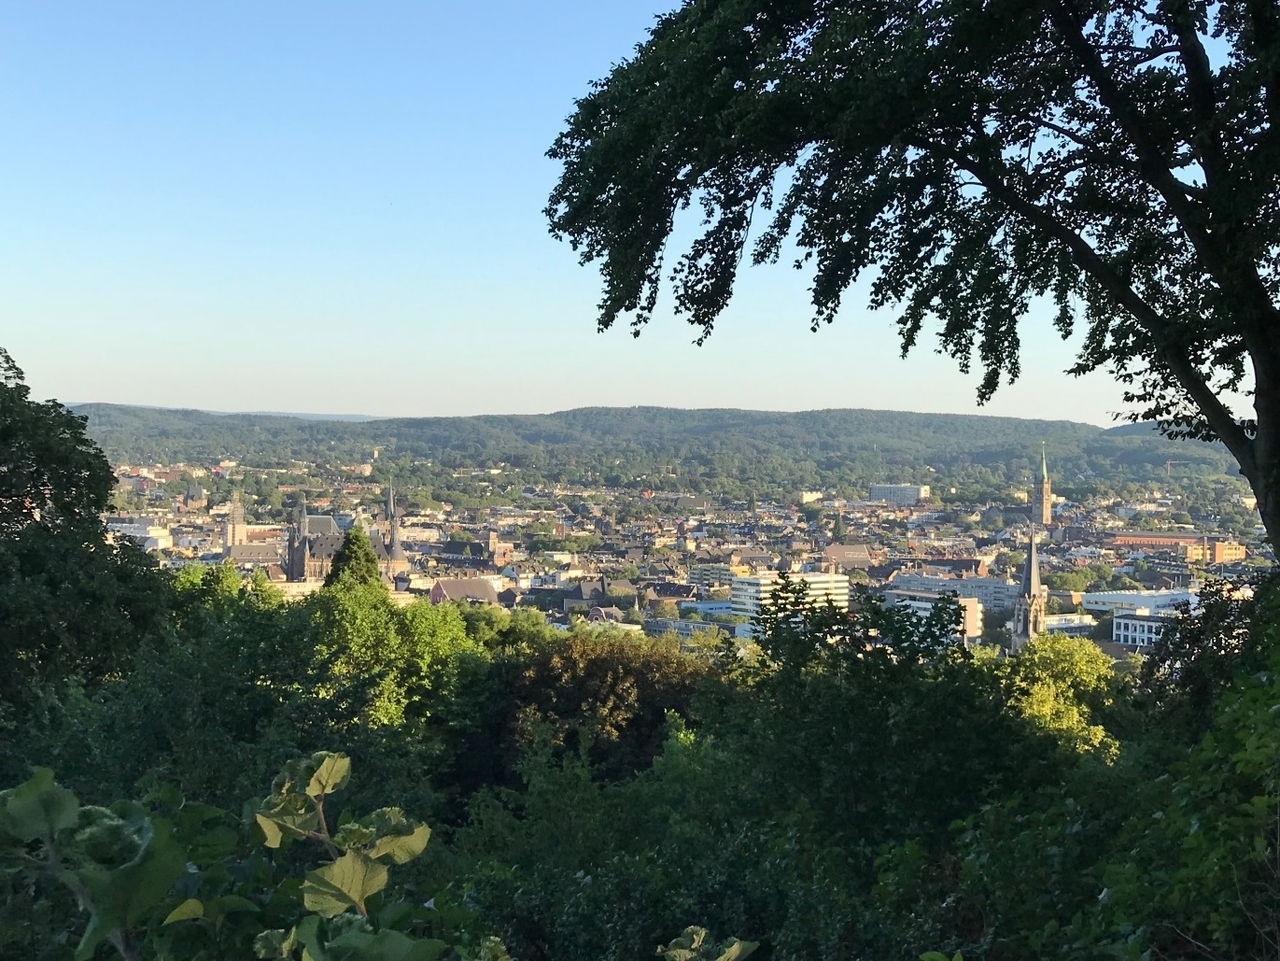 The view of Aachen from a hill